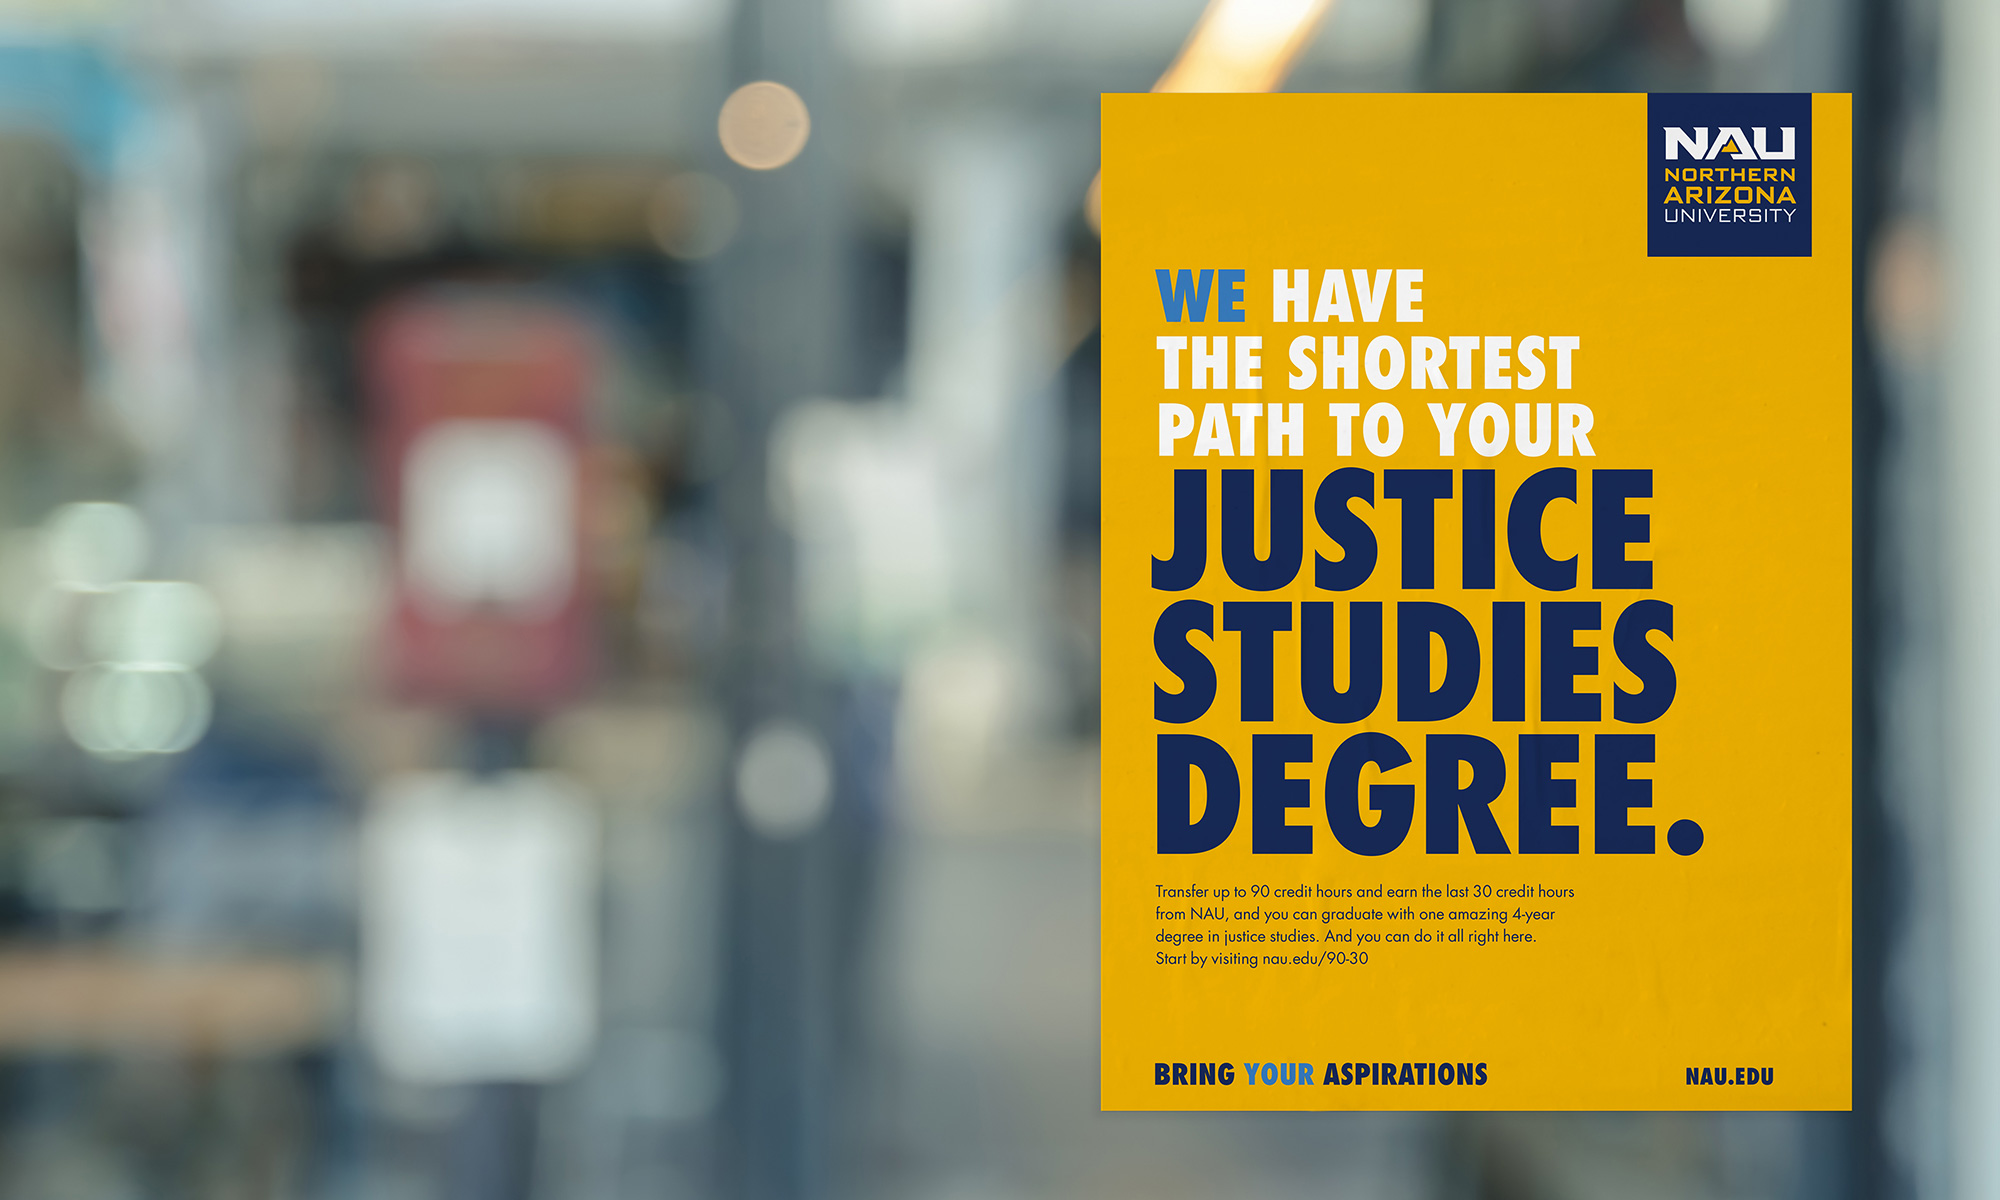 We have the shortest path to your justice studies degree.